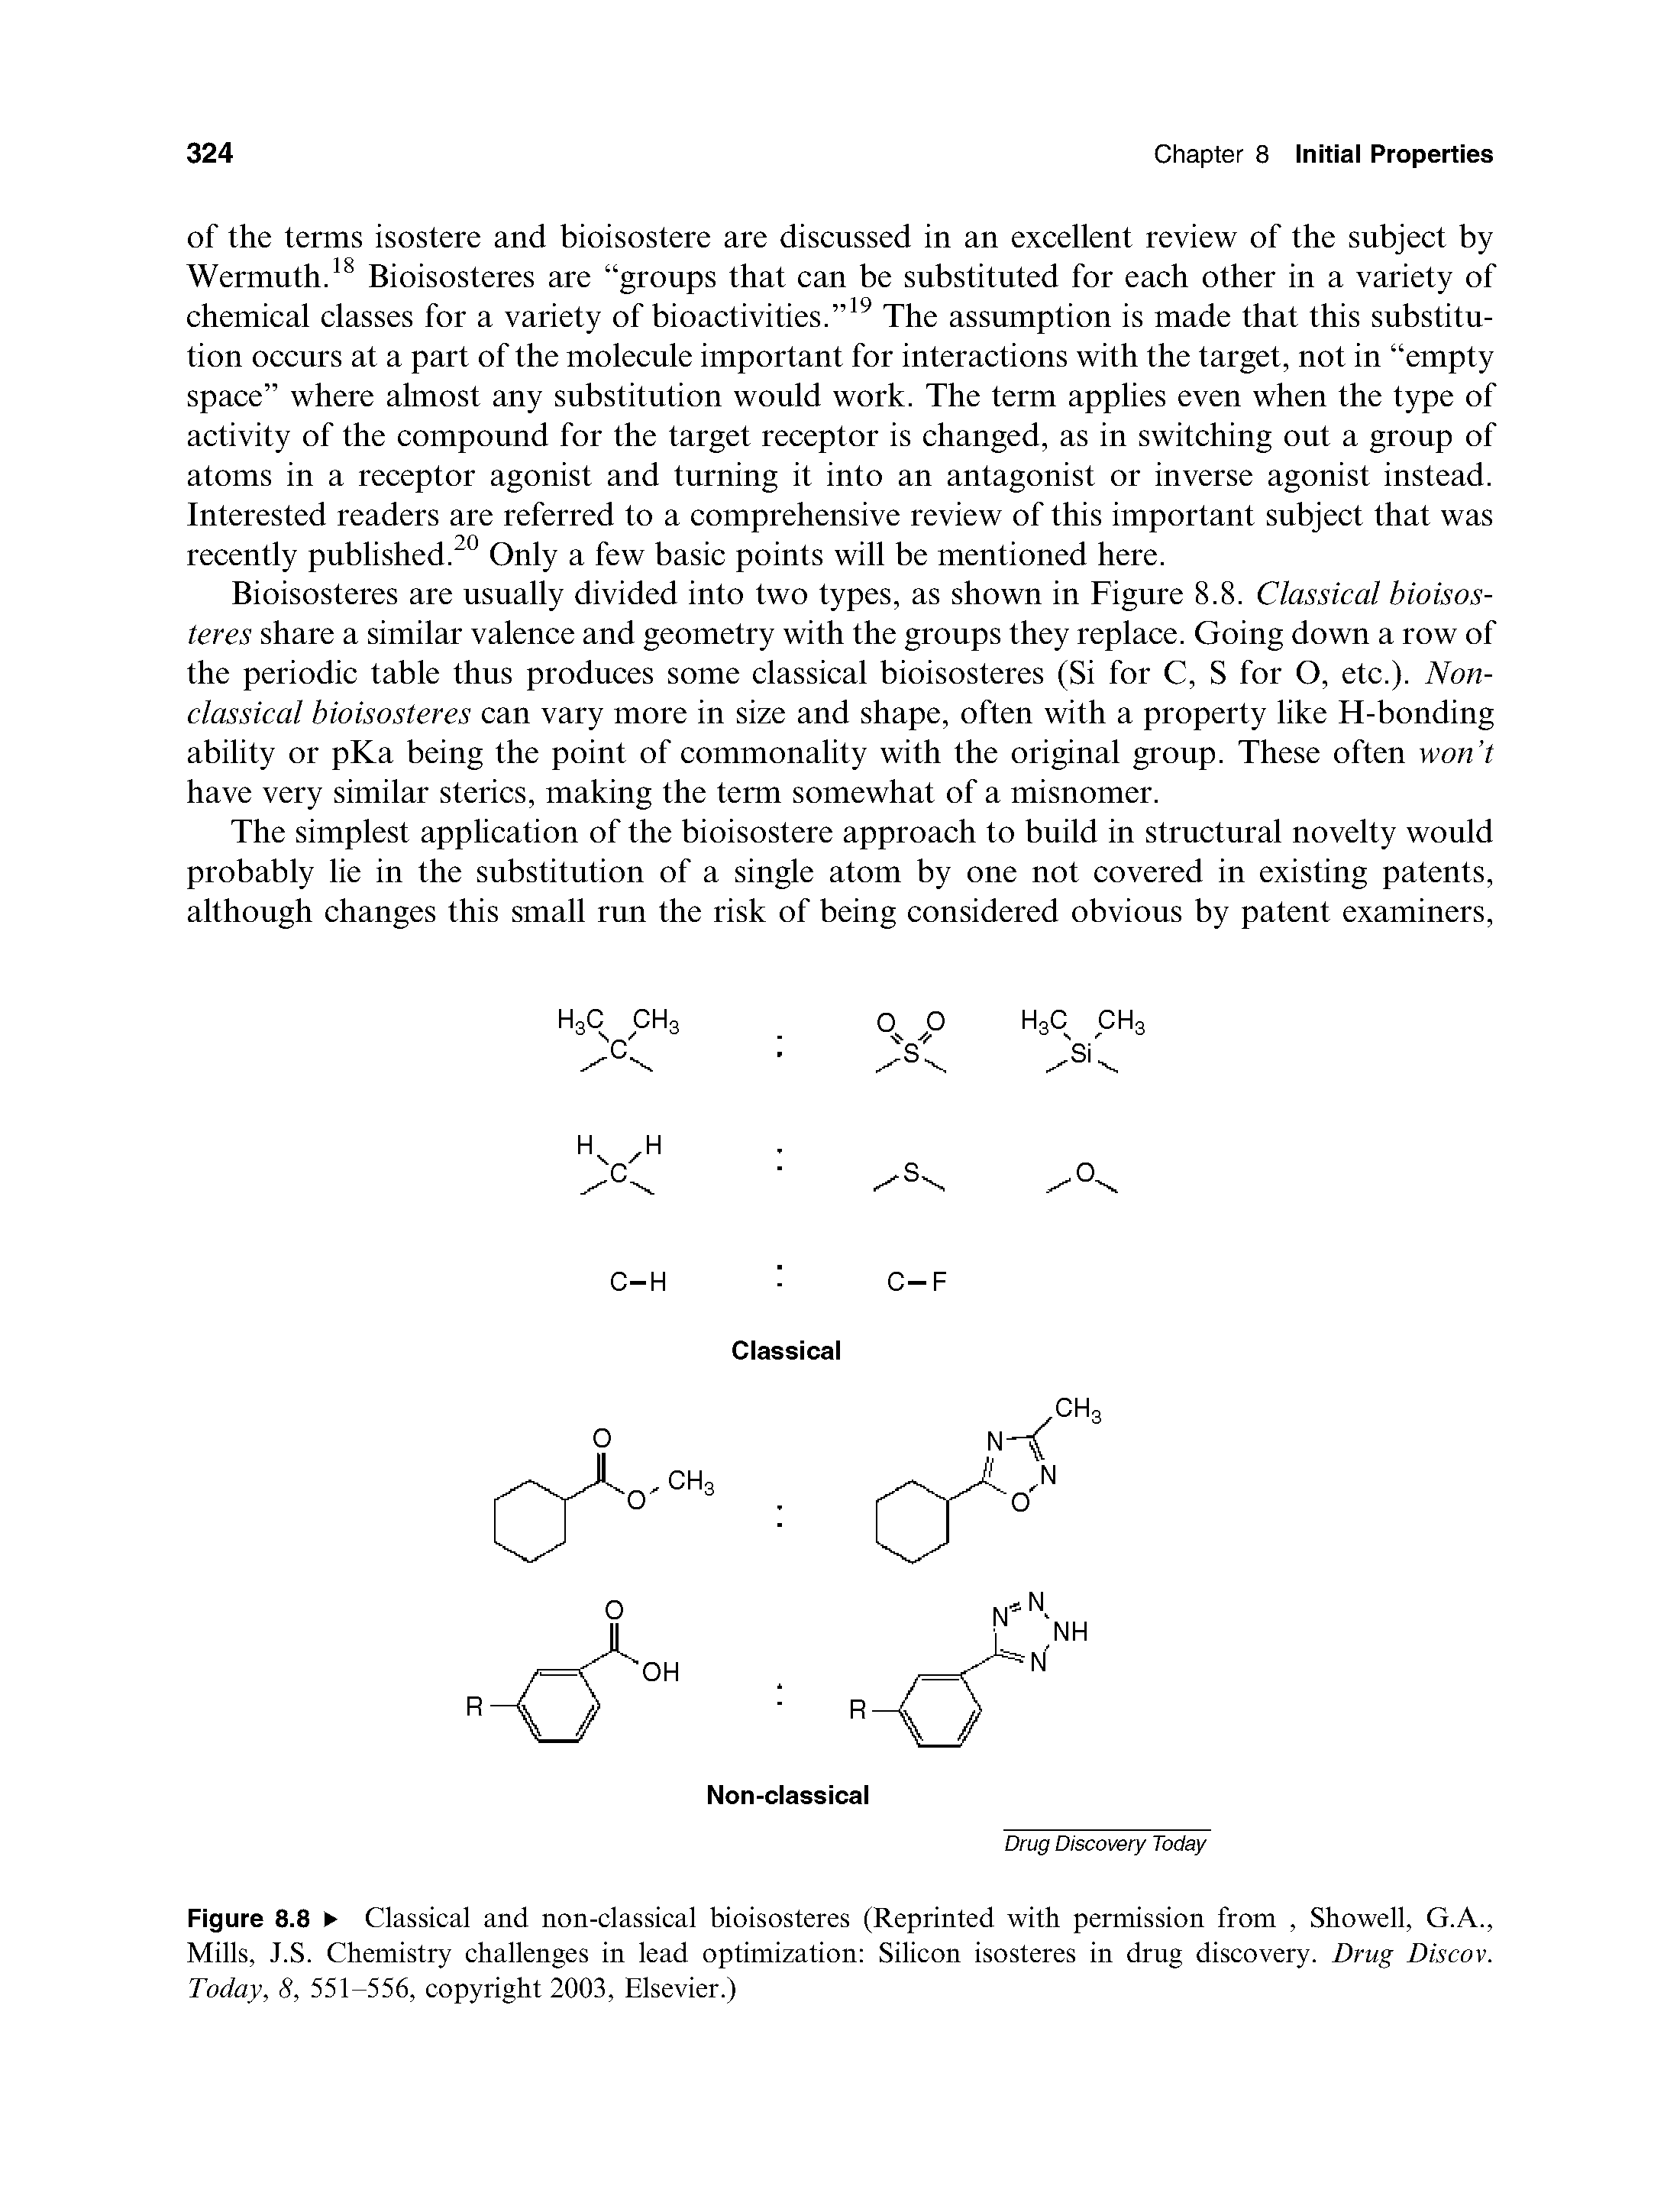 Figure 8.8 Classical and non-classical bioisosteres (Reprinted with permission from, Showell, G.A., Mills, J.S. Chemistry challenges in lead optimization Silicon isosteres in drug discovery. Drug Discov. Today, 8, 551-556, copyright 2003, Elsevier.)...